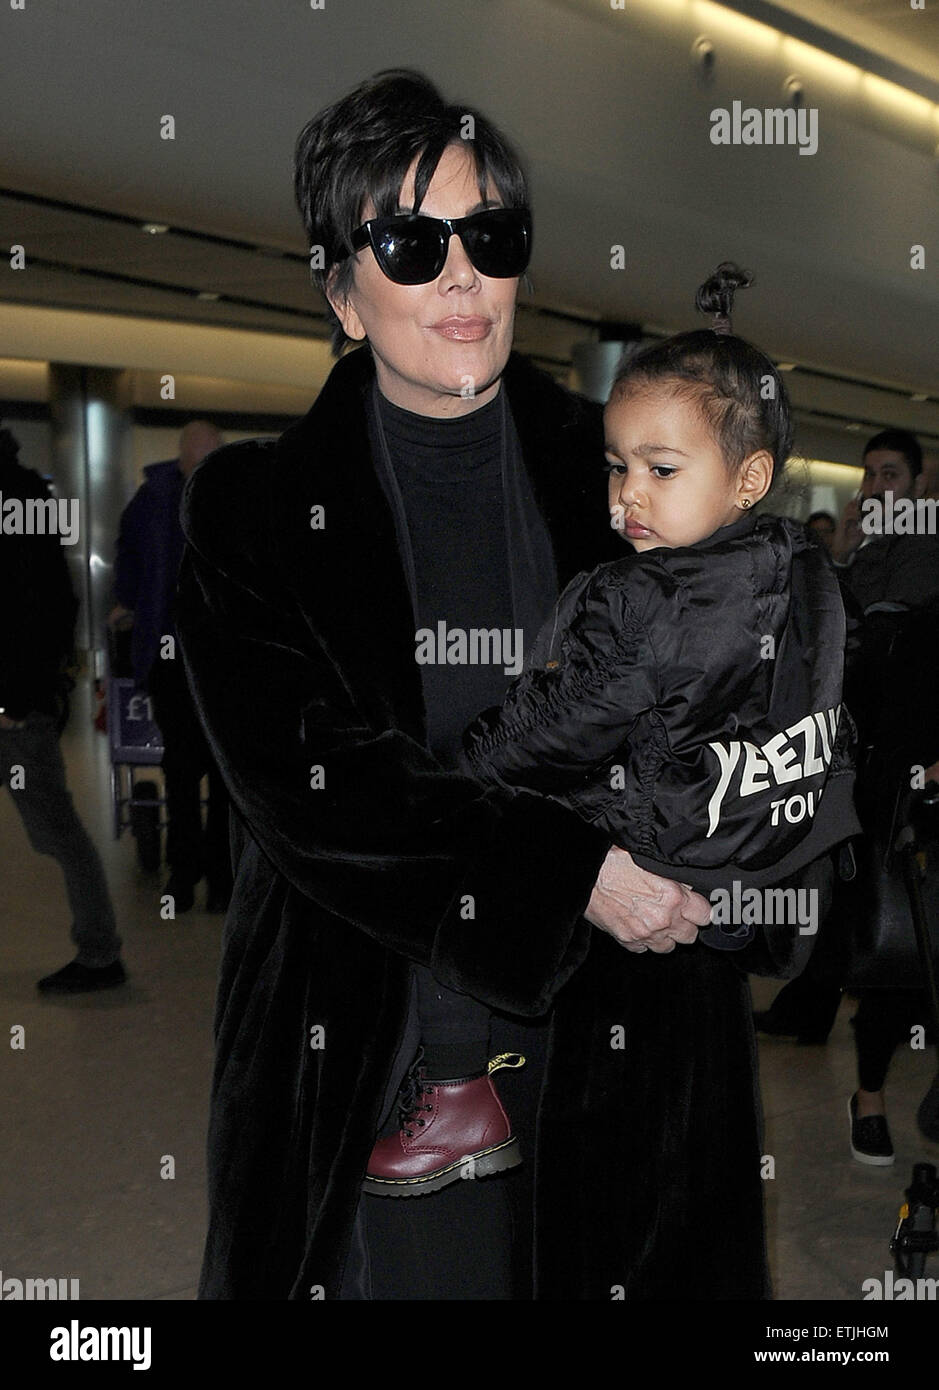 Kris Jenner, wearing a pair of Kanye West x Adidas Originals Yeezy 750 Boost,  arrives at Heathrow Airport carrying baby North West, who was wearing a 'Yeezus  Tour" bomber jacket in support